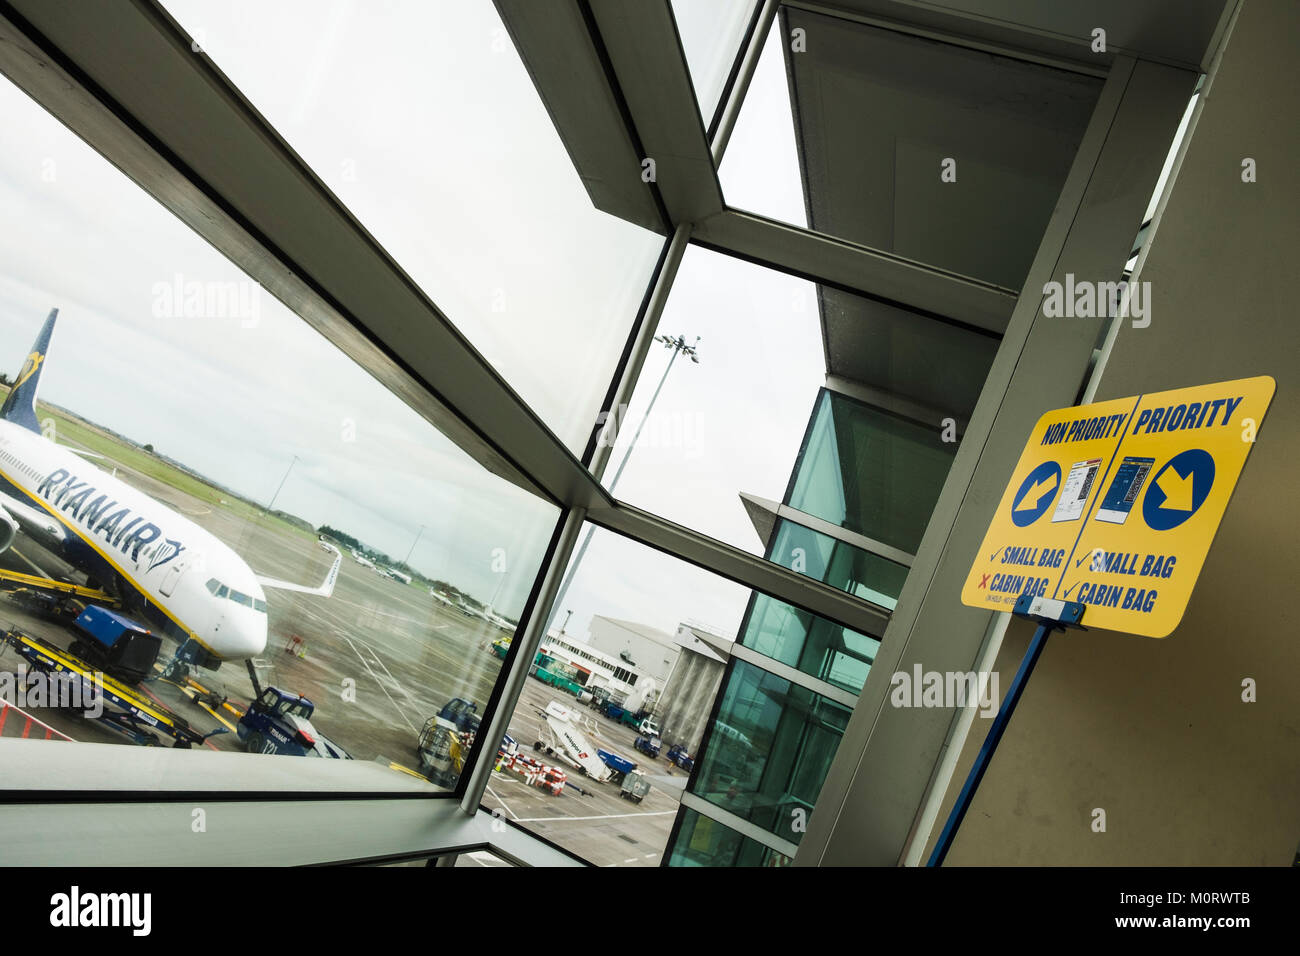 New Ryanair signage with the categories for boarding with cabin baggage, priority, non priority, cabin bags, restrictions, at departure gates in Dubli Stock Photo